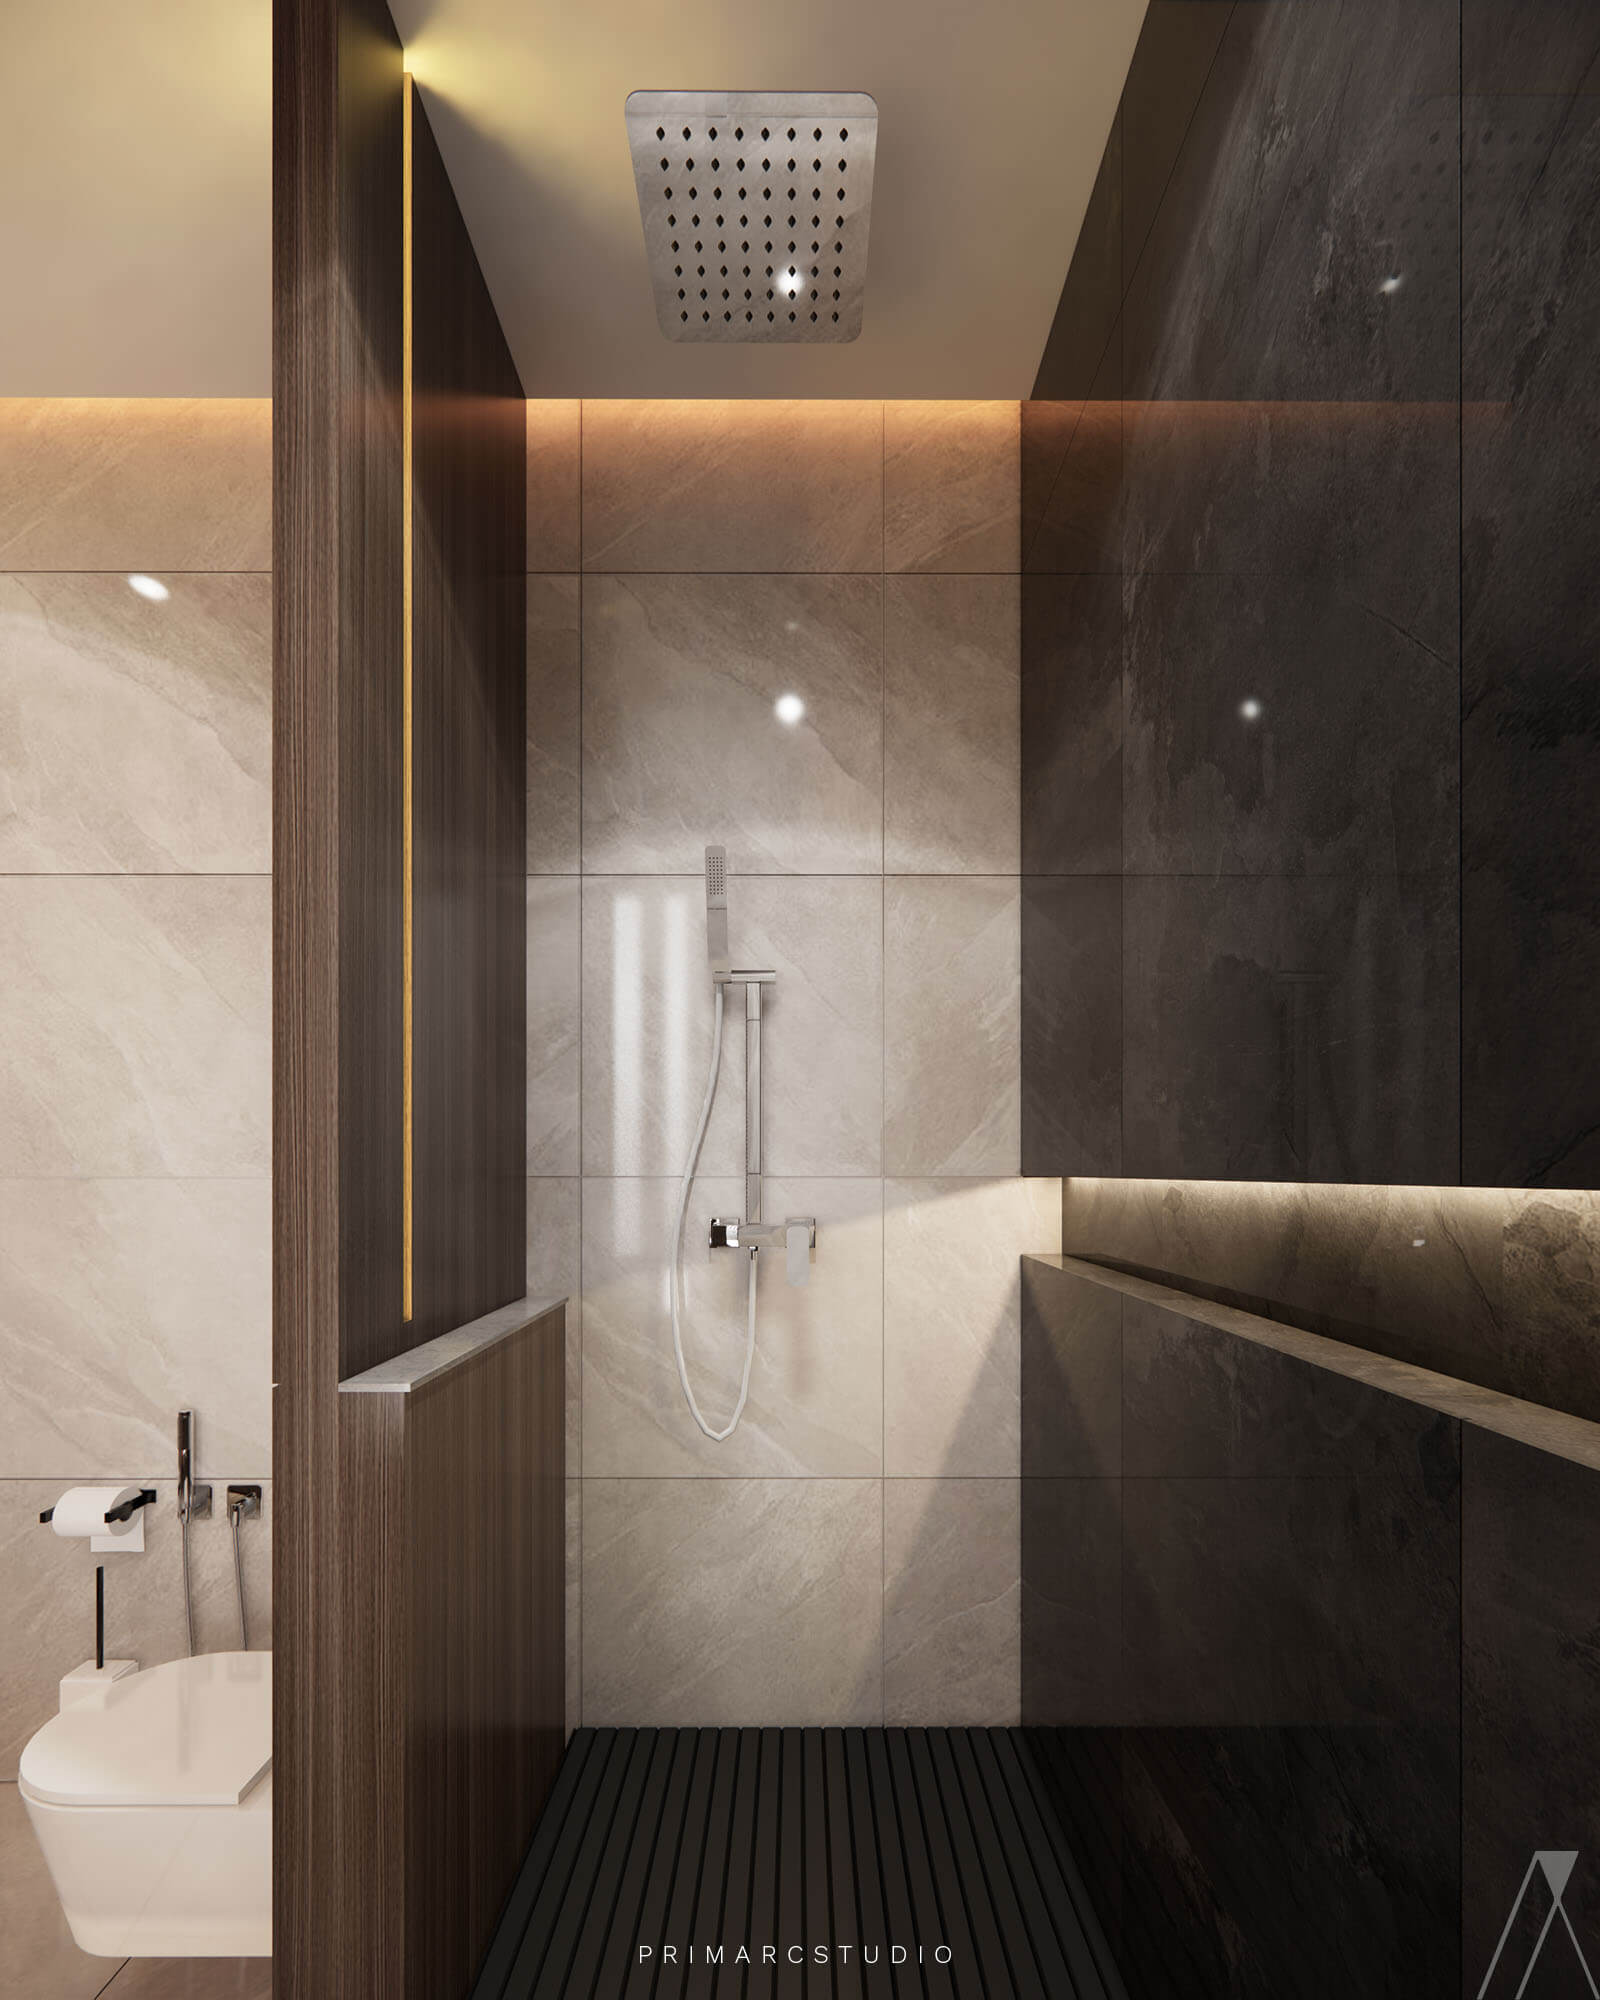 Washroom interior design with niche in the shower area in wooden and beige colors